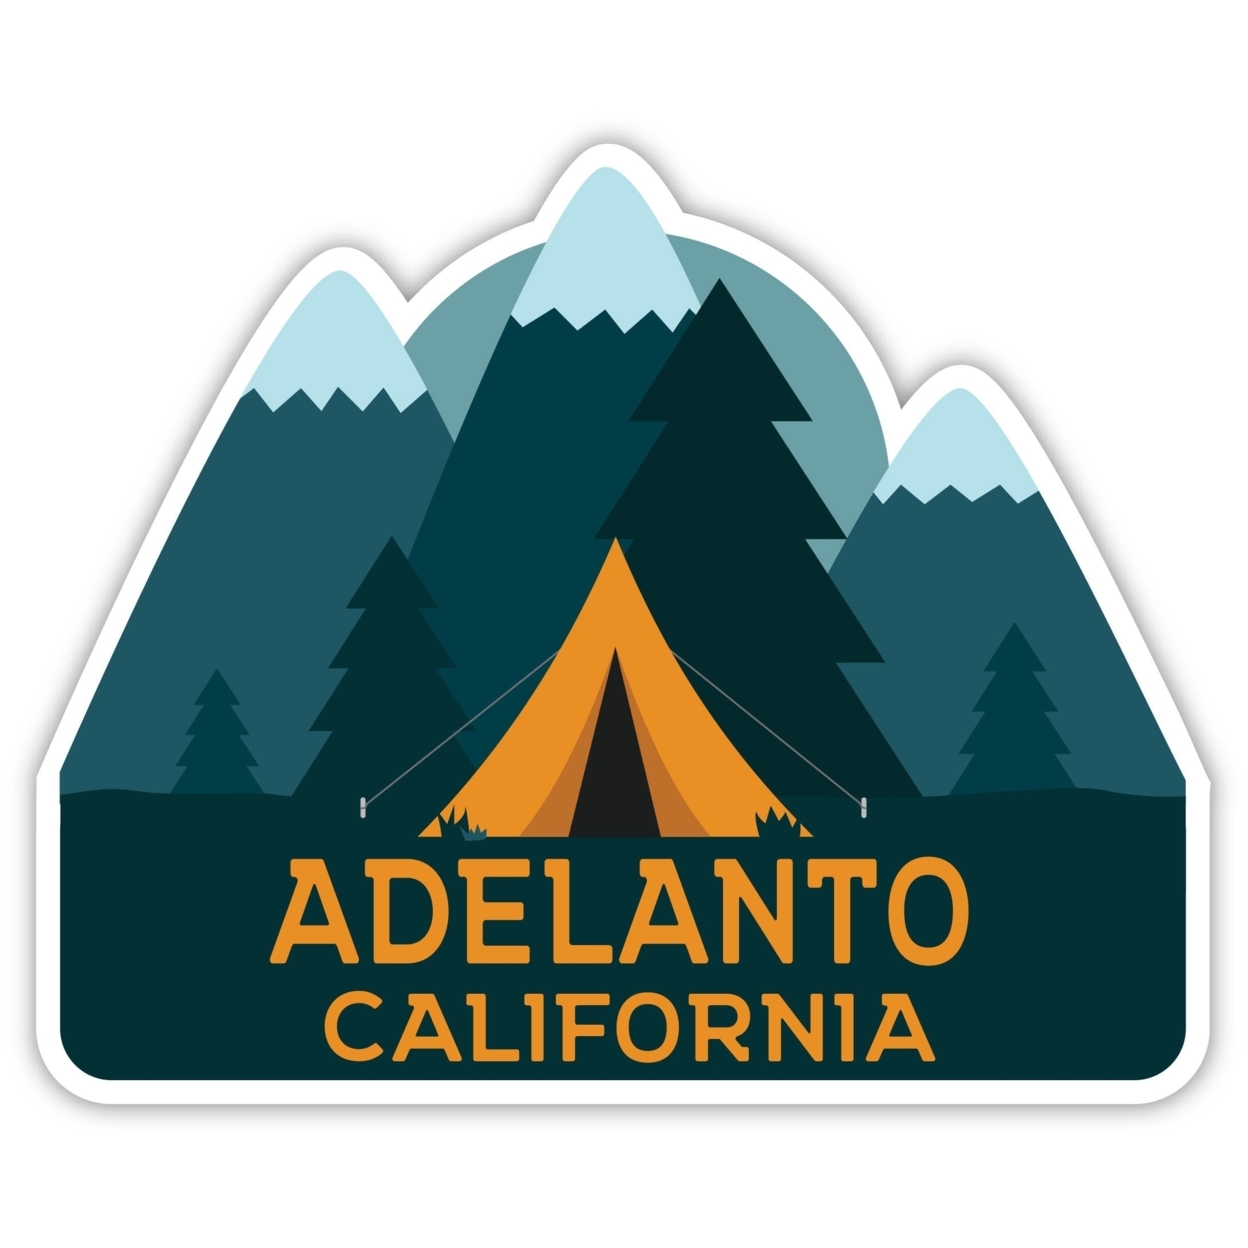 Adelanto California Souvenir Decorative Stickers (Choose Theme And Size) - 4-Pack, 6-Inch, Tent